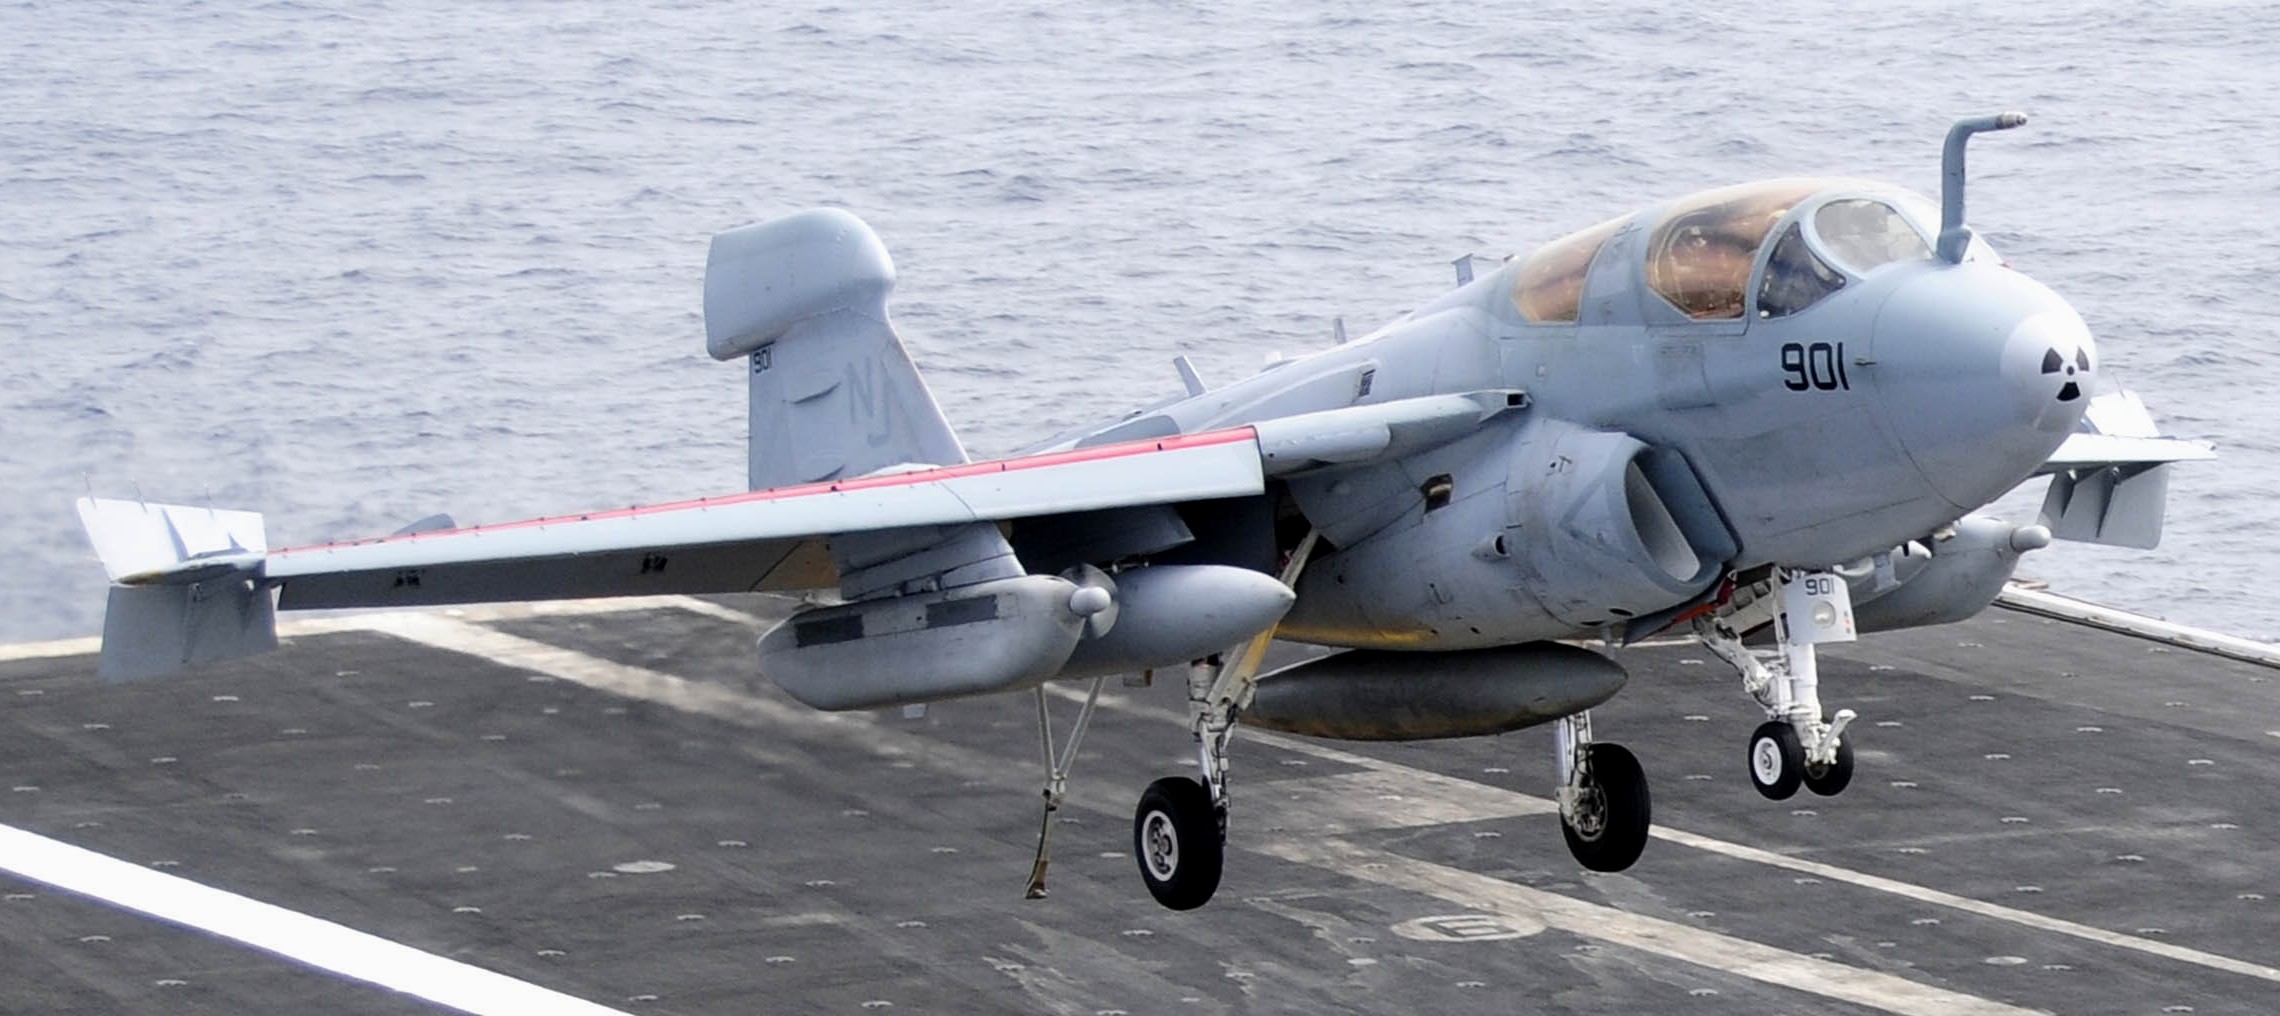 vaq-129 vikings electronic attack squadron fleet replacement frs us navy ea-6b prowler 40